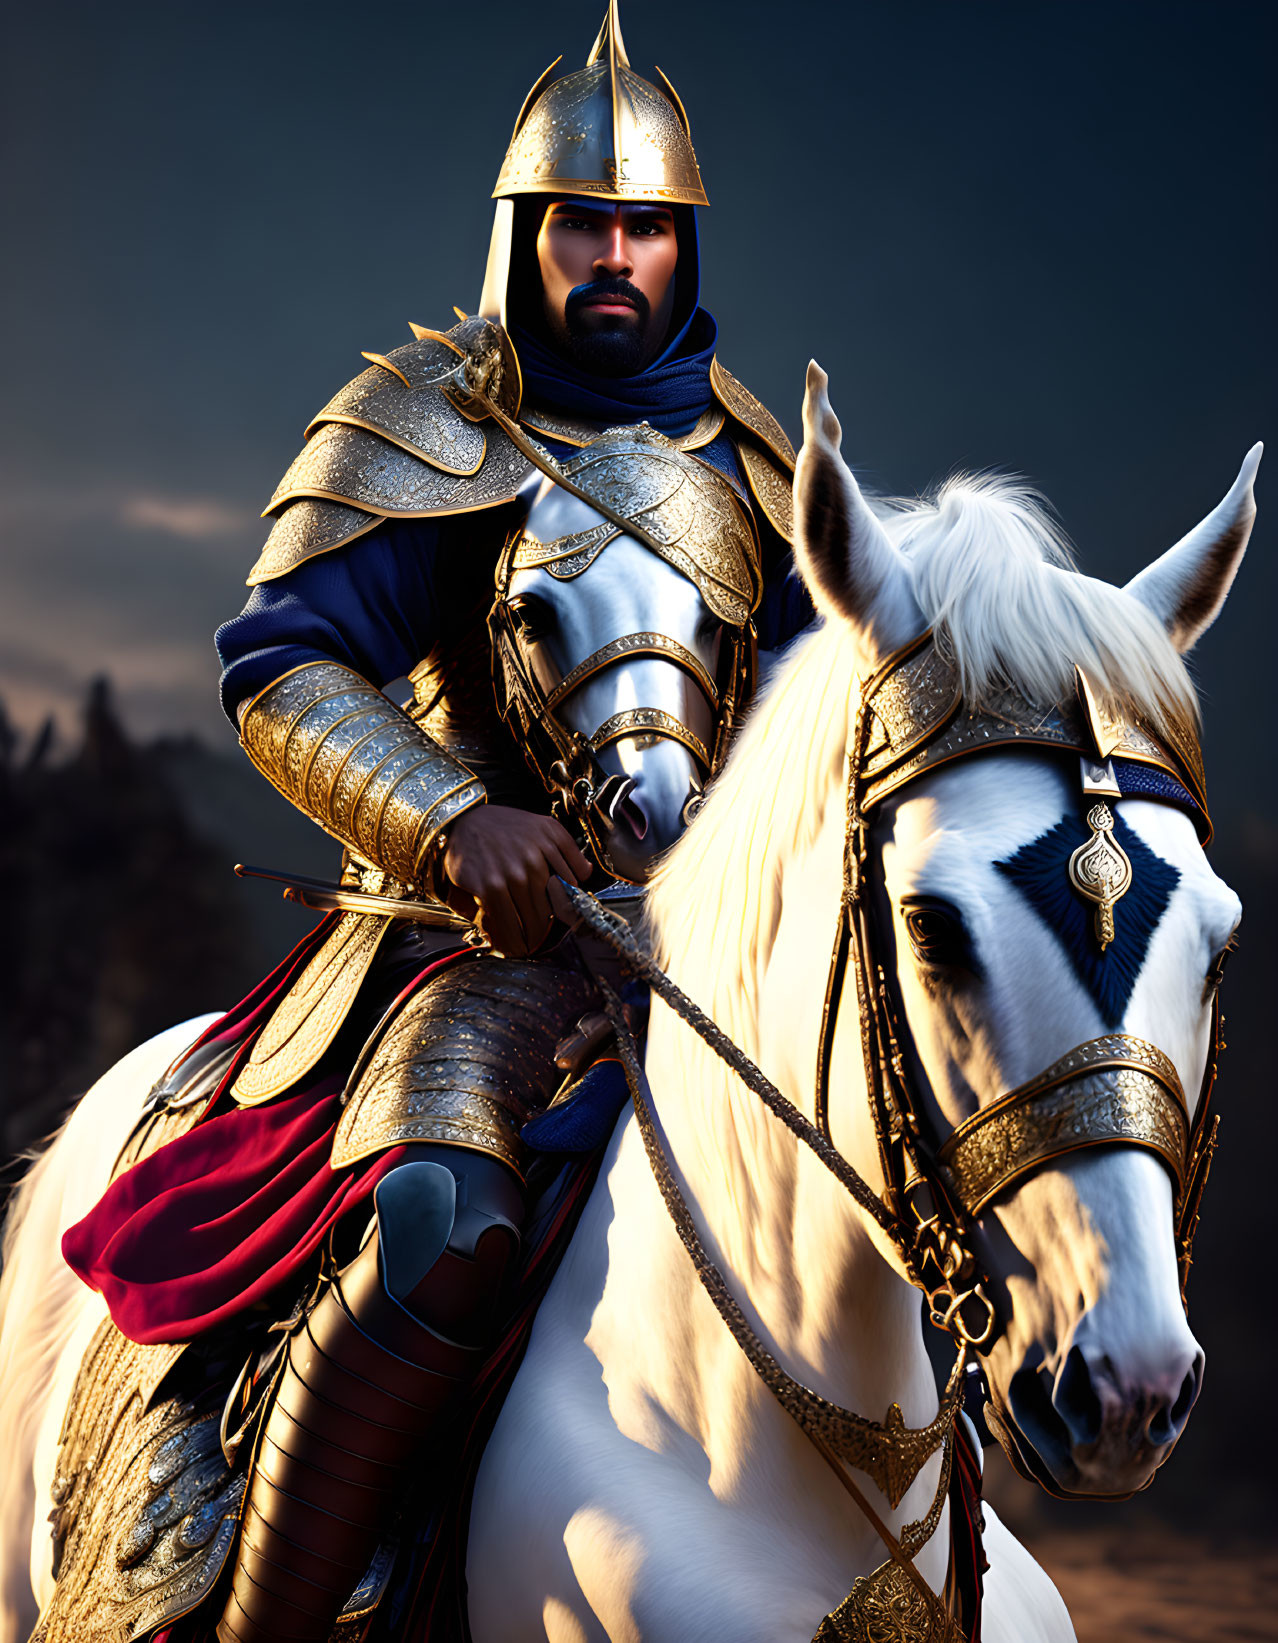 Knight in Shining Armor on White Horse with Plumed Helmet